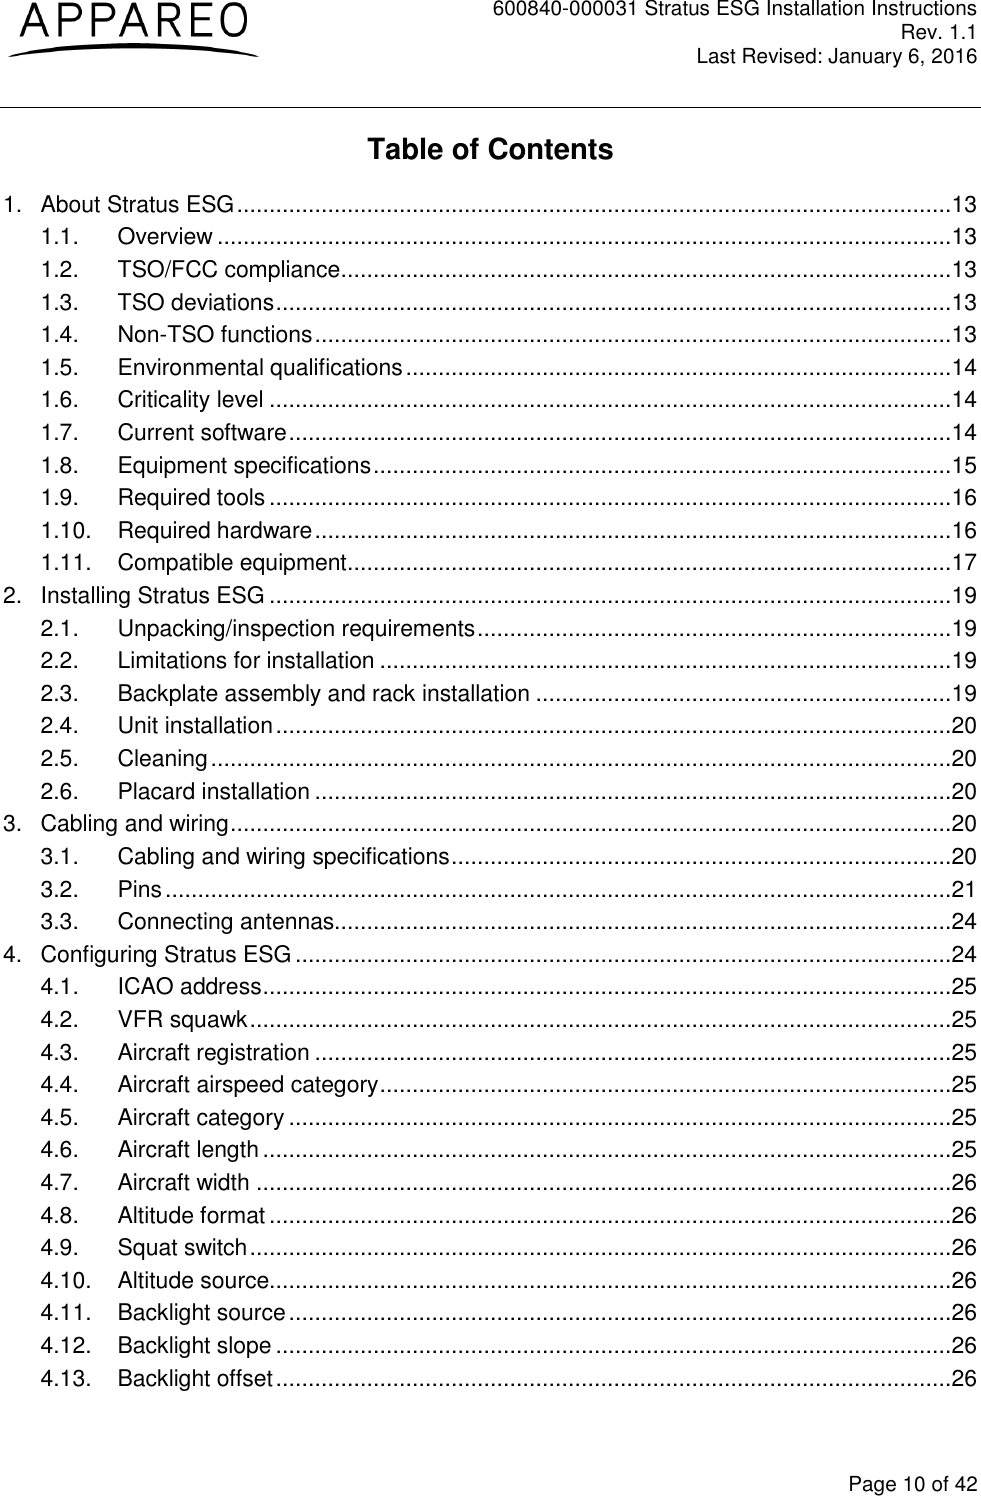 600840-000031 Stratus ESG Installation Instructions Rev. 1.1 Last Revised: January 6, 2016  Page 10 of 42 Table of Contents 1. About Stratus ESG ..............................................................................................................13 1.1. Overview .................................................................................................................13 1.2. TSO/FCC compliance ..............................................................................................13 1.3. TSO deviations ........................................................................................................13 1.4. Non-TSO functions ..................................................................................................13 1.5. Environmental qualifications ....................................................................................14 1.6. Criticality level .........................................................................................................14 1.7. Current software ......................................................................................................14 1.8. Equipment specifications .........................................................................................15 1.9. Required tools .........................................................................................................16 1.10. Required hardware ..................................................................................................16 1.11. Compatible equipment .............................................................................................17 2. Installing Stratus ESG .........................................................................................................19 2.1. Unpacking/inspection requirements .........................................................................19 2.2. Limitations for installation ........................................................................................19 2.3. Backplate assembly and rack installation ................................................................19 2.4. Unit installation ........................................................................................................20 2.5. Cleaning ..................................................................................................................20 2.6. Placard installation ..................................................................................................20 3. Cabling and wiring ...............................................................................................................20 3.1. Cabling and wiring specifications .............................................................................20 3.2. Pins .........................................................................................................................21 3.3. Connecting antennas...............................................................................................24 4. Configuring Stratus ESG .....................................................................................................24 4.1. ICAO address ..........................................................................................................25 4.2. VFR squawk ............................................................................................................25 4.3. Aircraft registration ..................................................................................................25 4.4. Aircraft airspeed category ........................................................................................25 4.5. Aircraft category ......................................................................................................25 4.6. Aircraft length ..........................................................................................................25 4.7. Aircraft width ...........................................................................................................26 4.8. Altitude format .........................................................................................................26 4.9. Squat switch ............................................................................................................26 4.10. Altitude source.........................................................................................................26 4.11. Backlight source ......................................................................................................26 4.12. Backlight slope ........................................................................................................26 4.13. Backlight offset ........................................................................................................26 